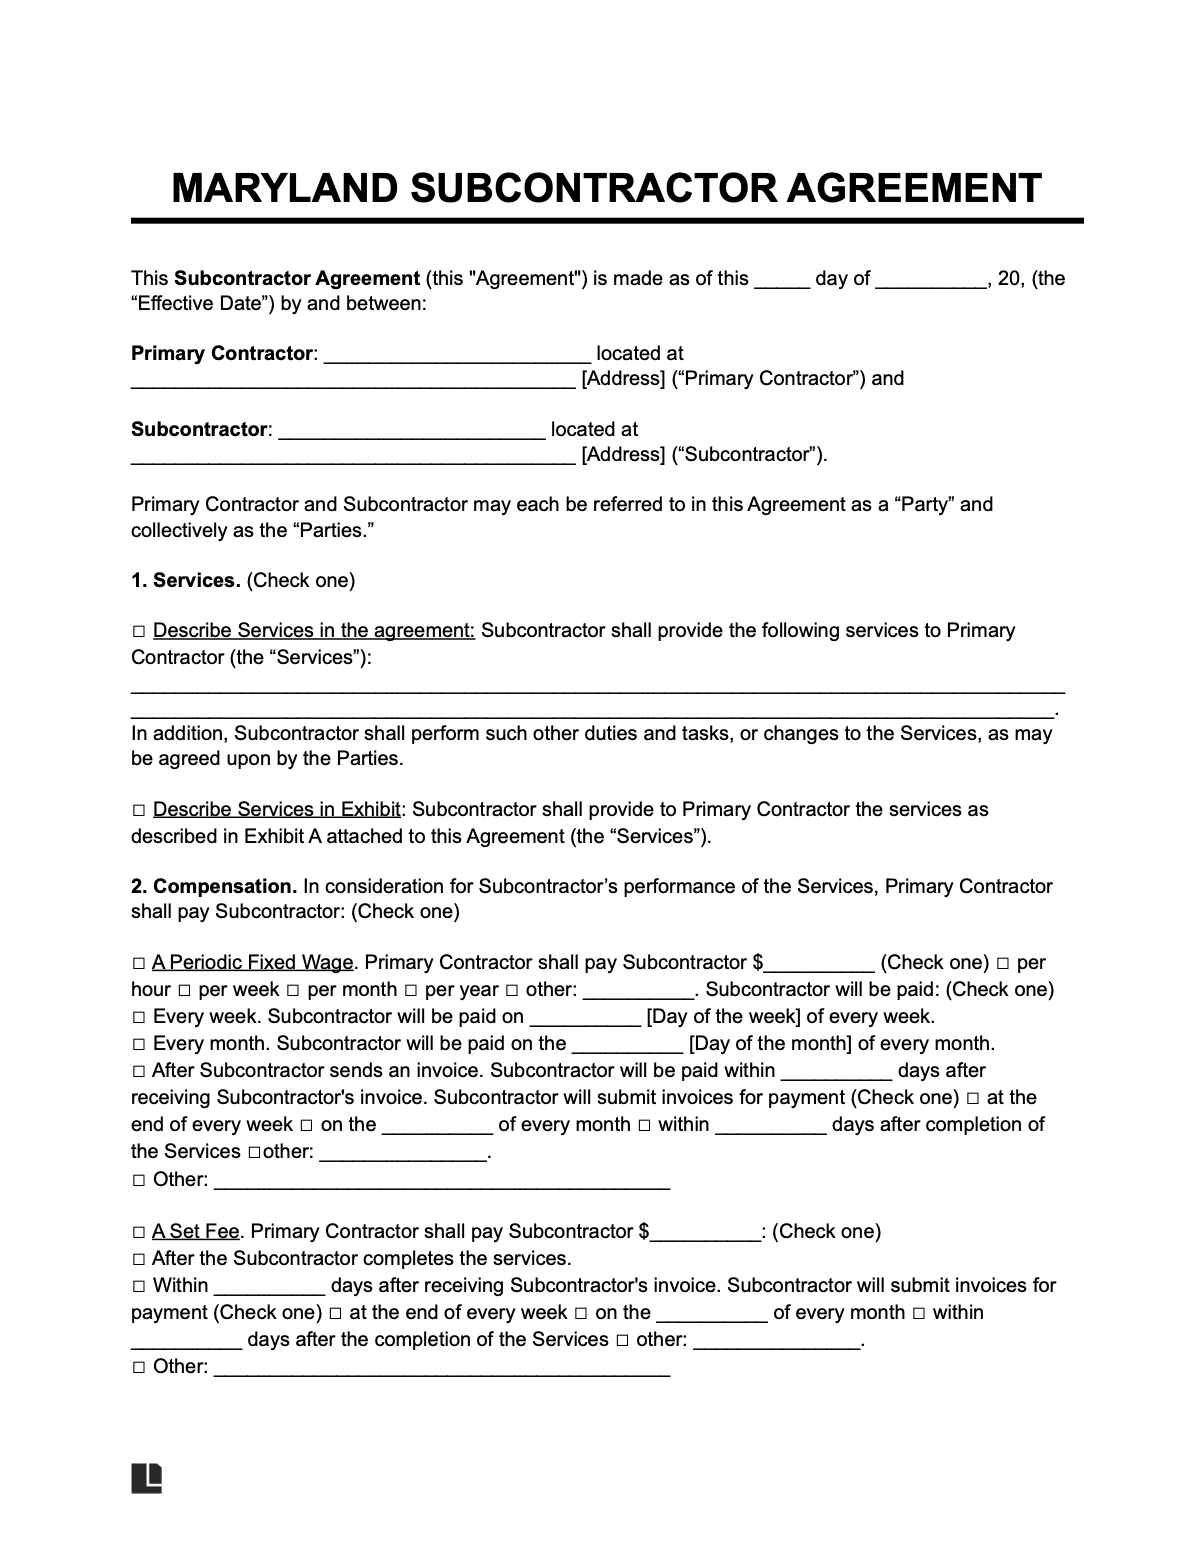 maryland subcontractor agreement template